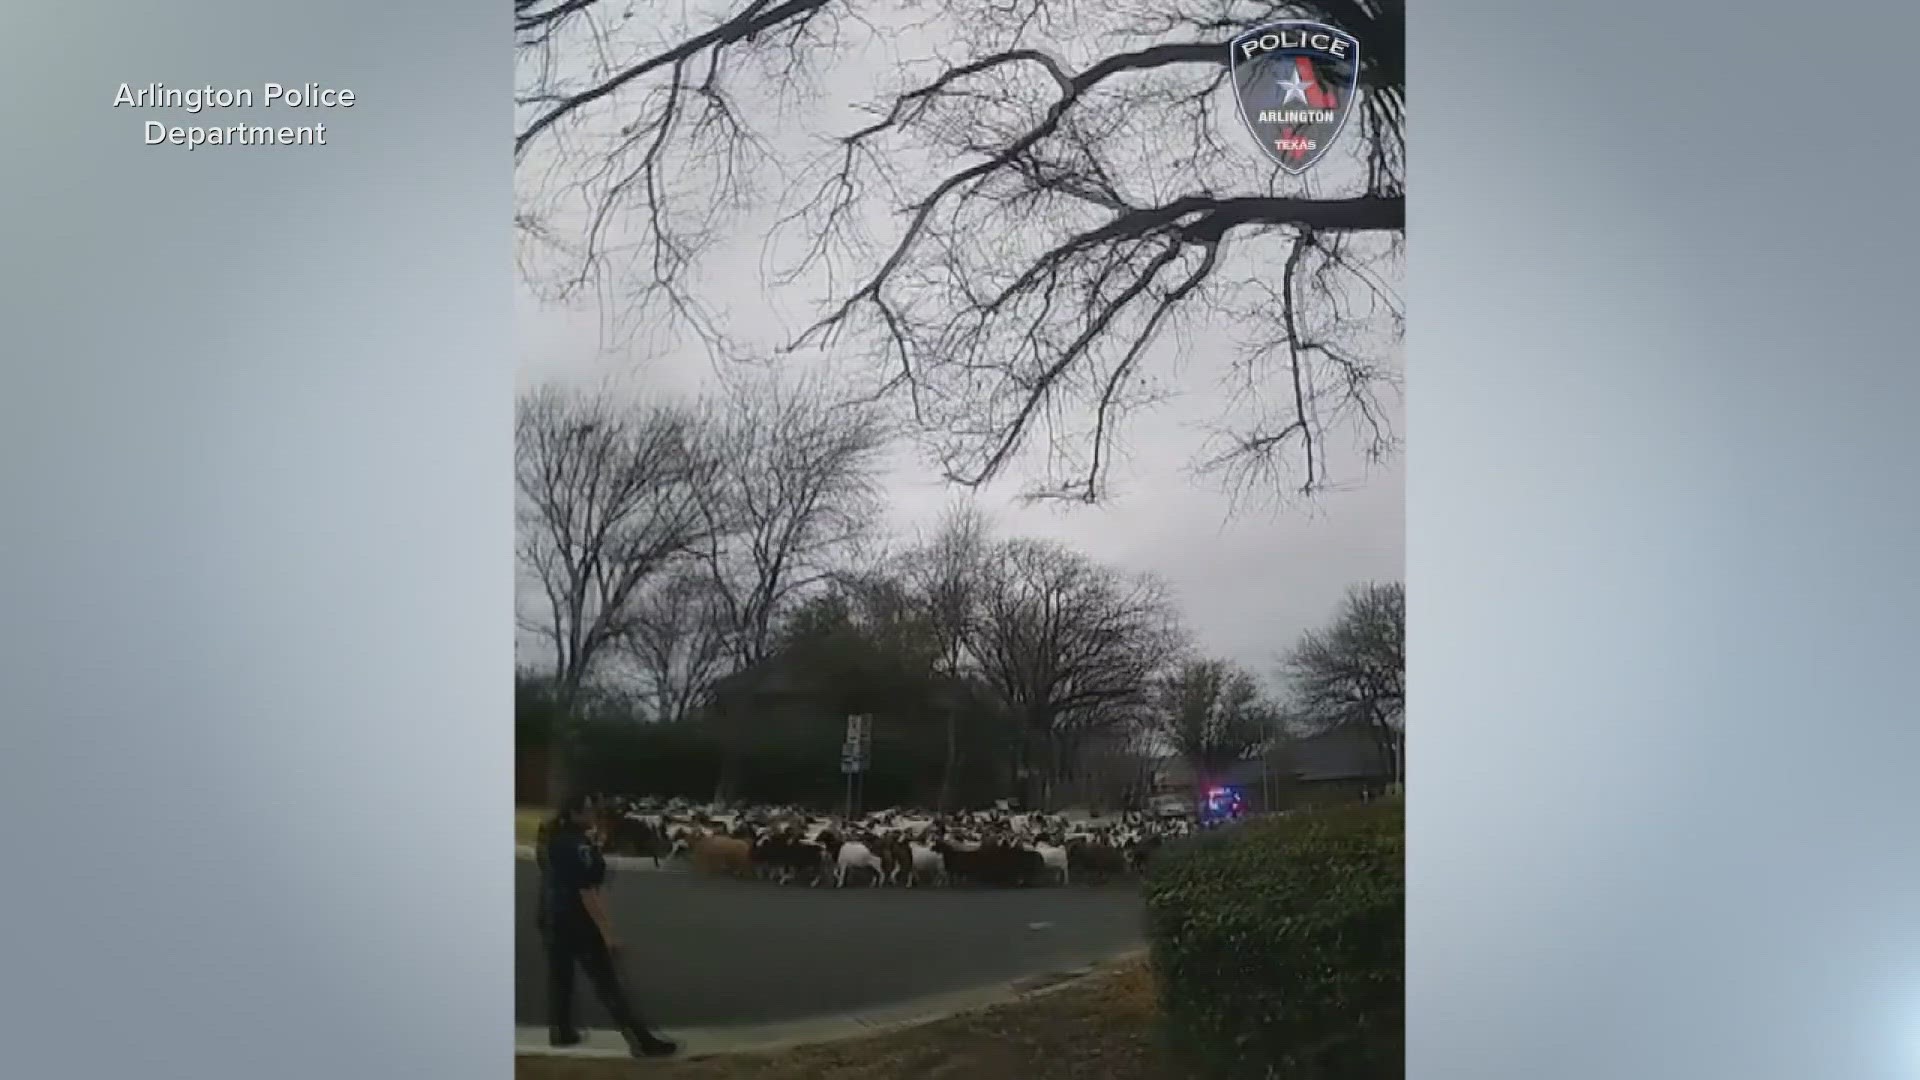 The goats reportedly escaped from a nearby natural area, but police were eventually able to account for all of them.